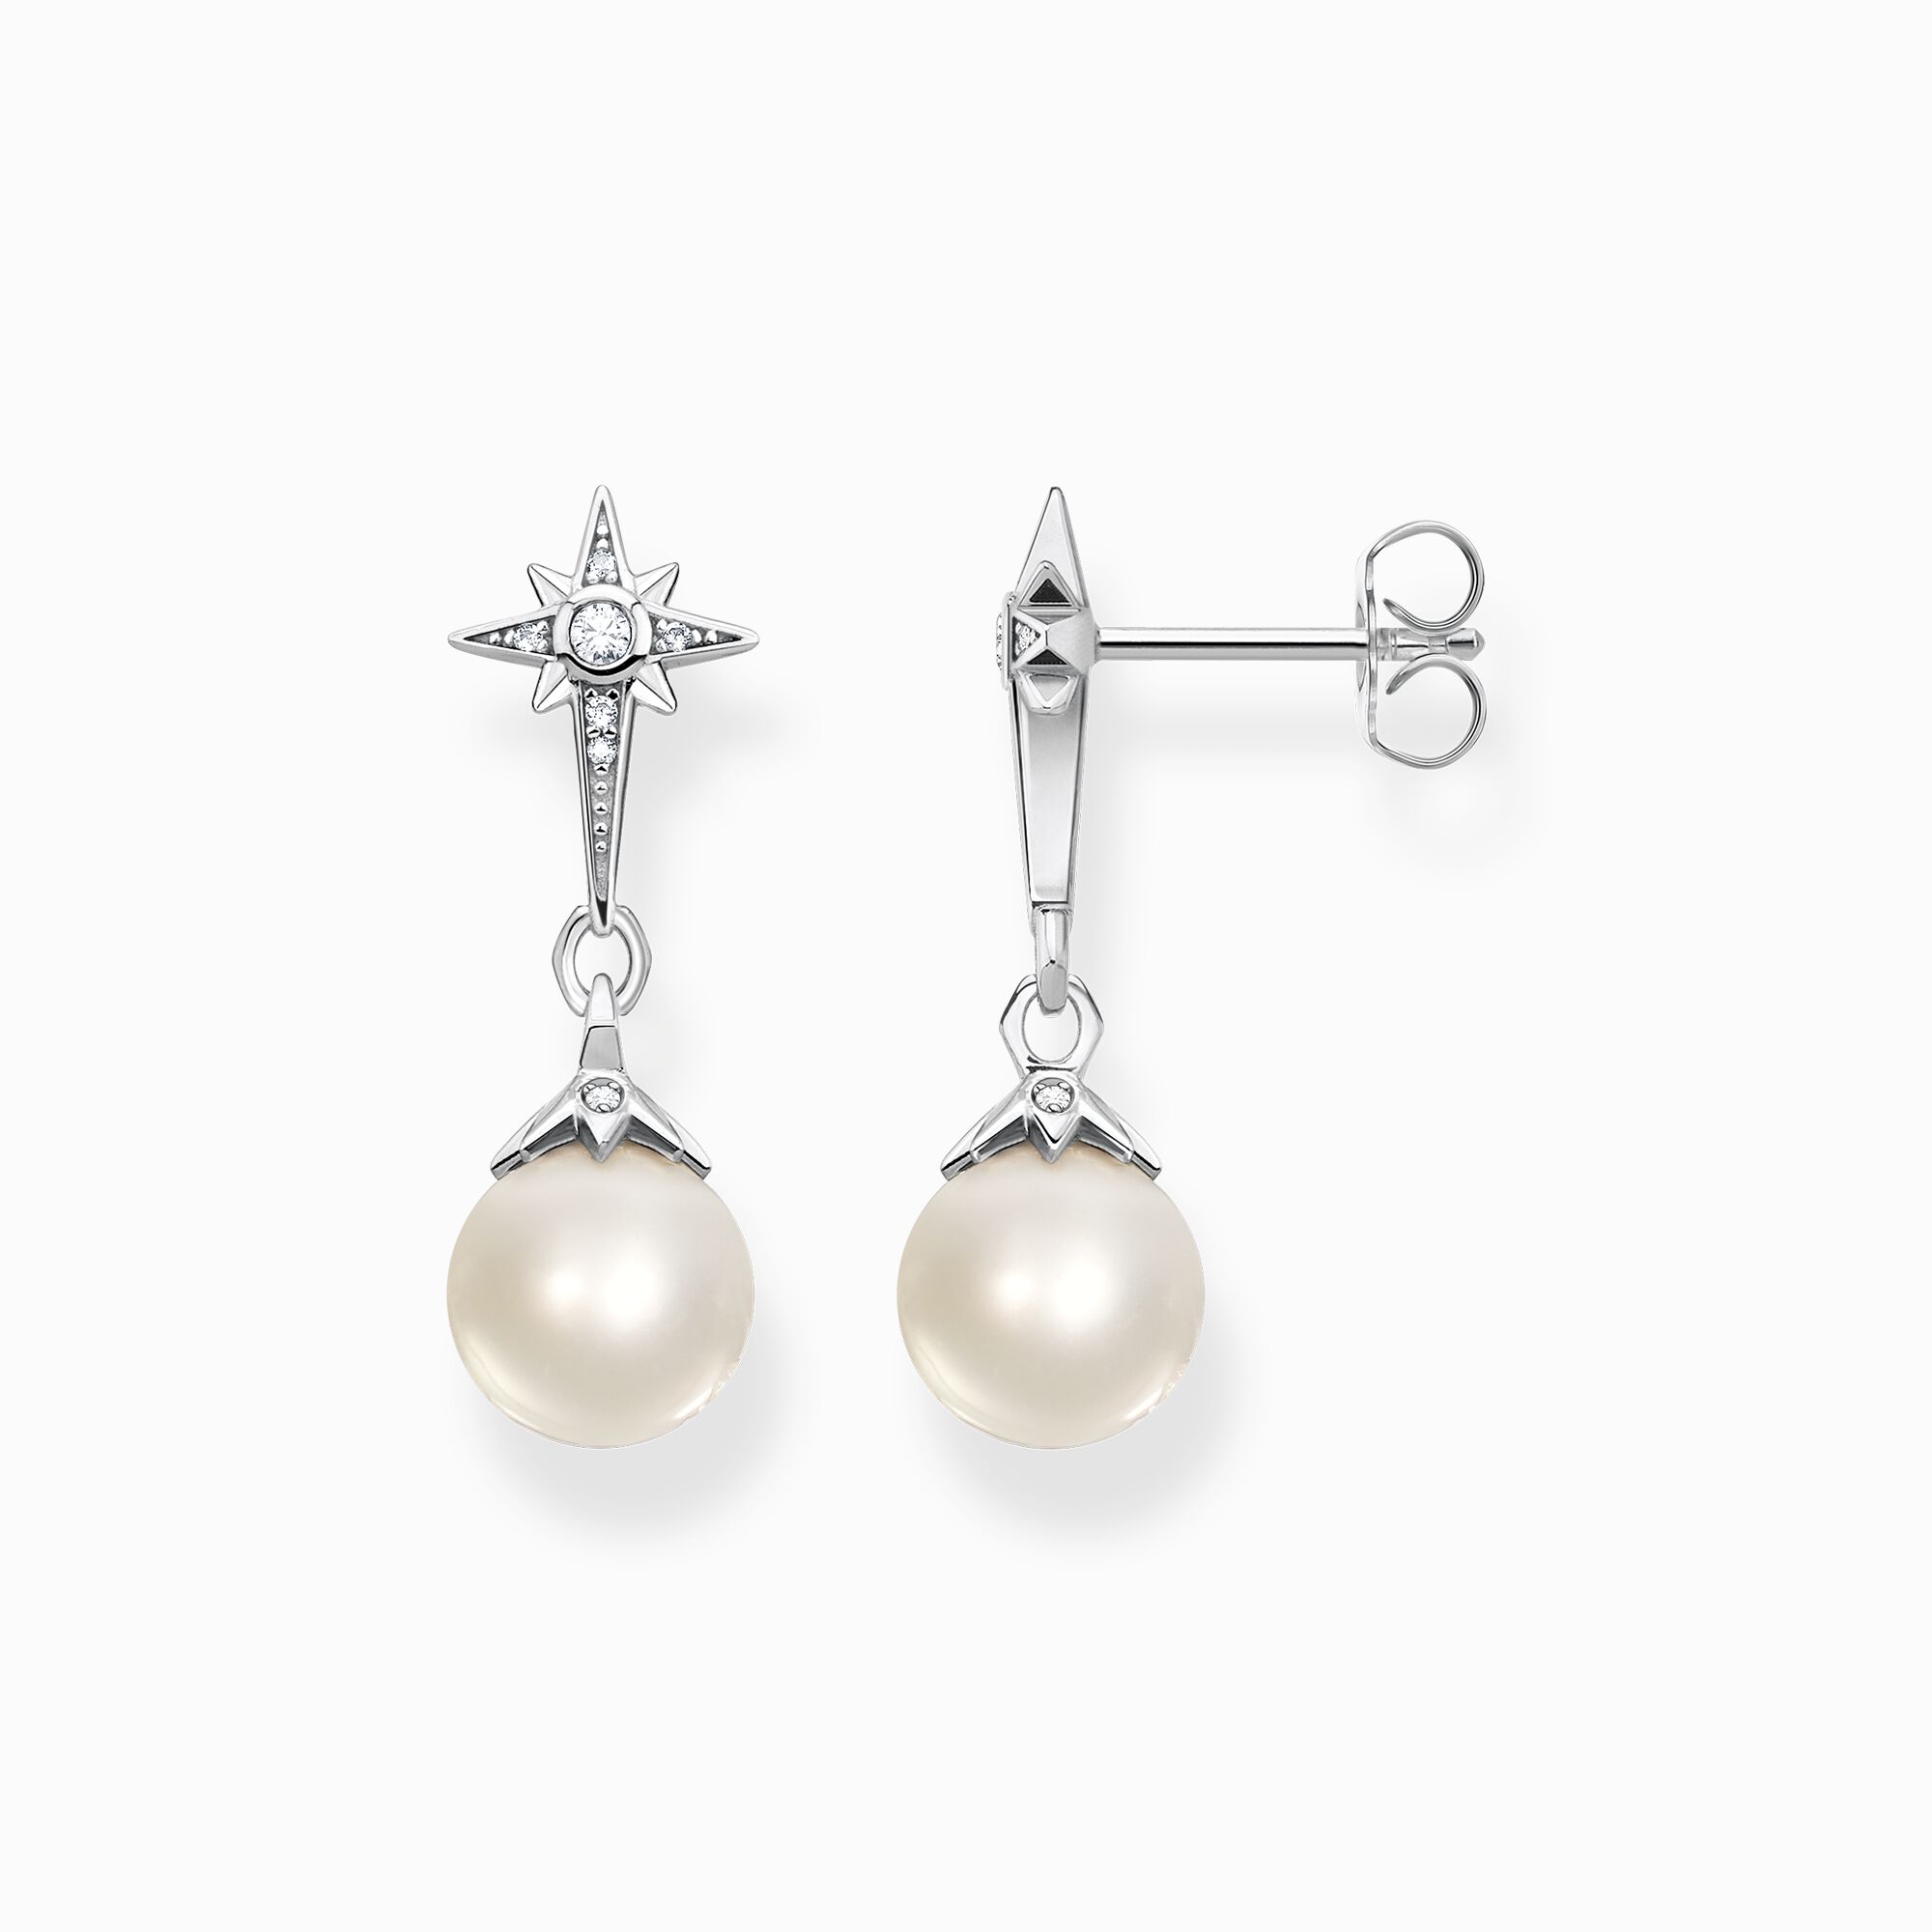 Earrings for women: Silver design with pearl | THOMAS SABO